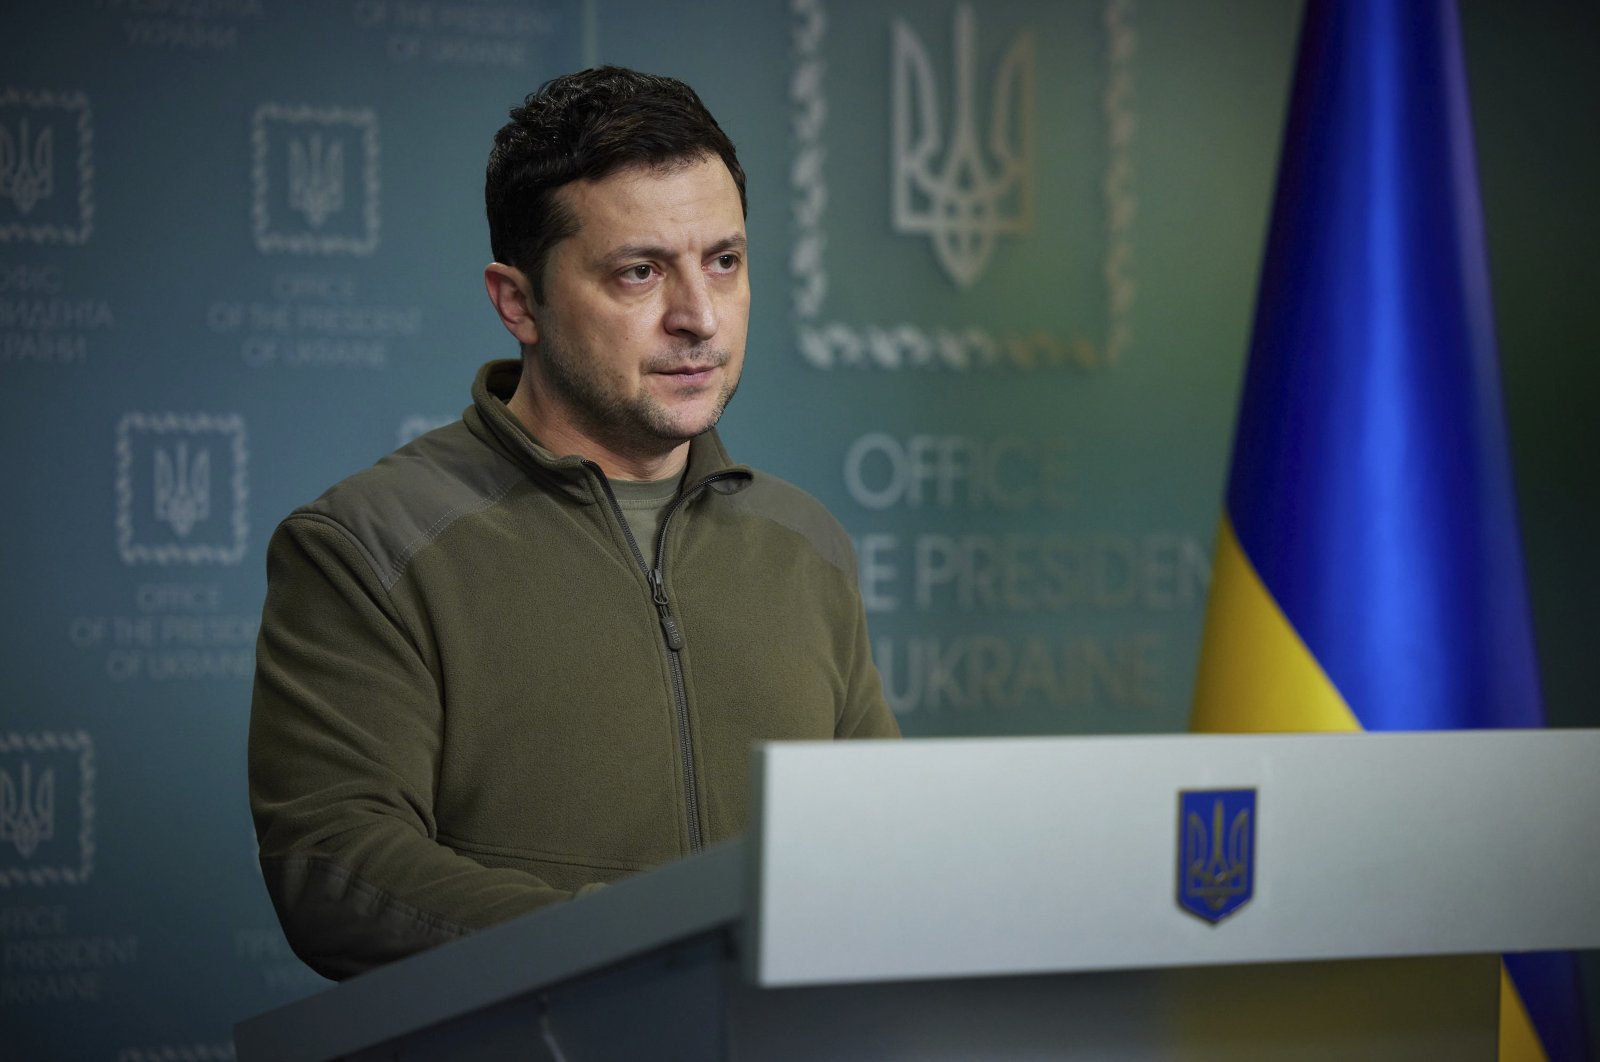 In this photo provided by the Ukrainian Presidential Press Office, Ukrainian President Volodymyr Zelenskyy delivers his speech addressing the nation in Kyiv, Ukraine, Feb. 25, 2022. (AP Photo)